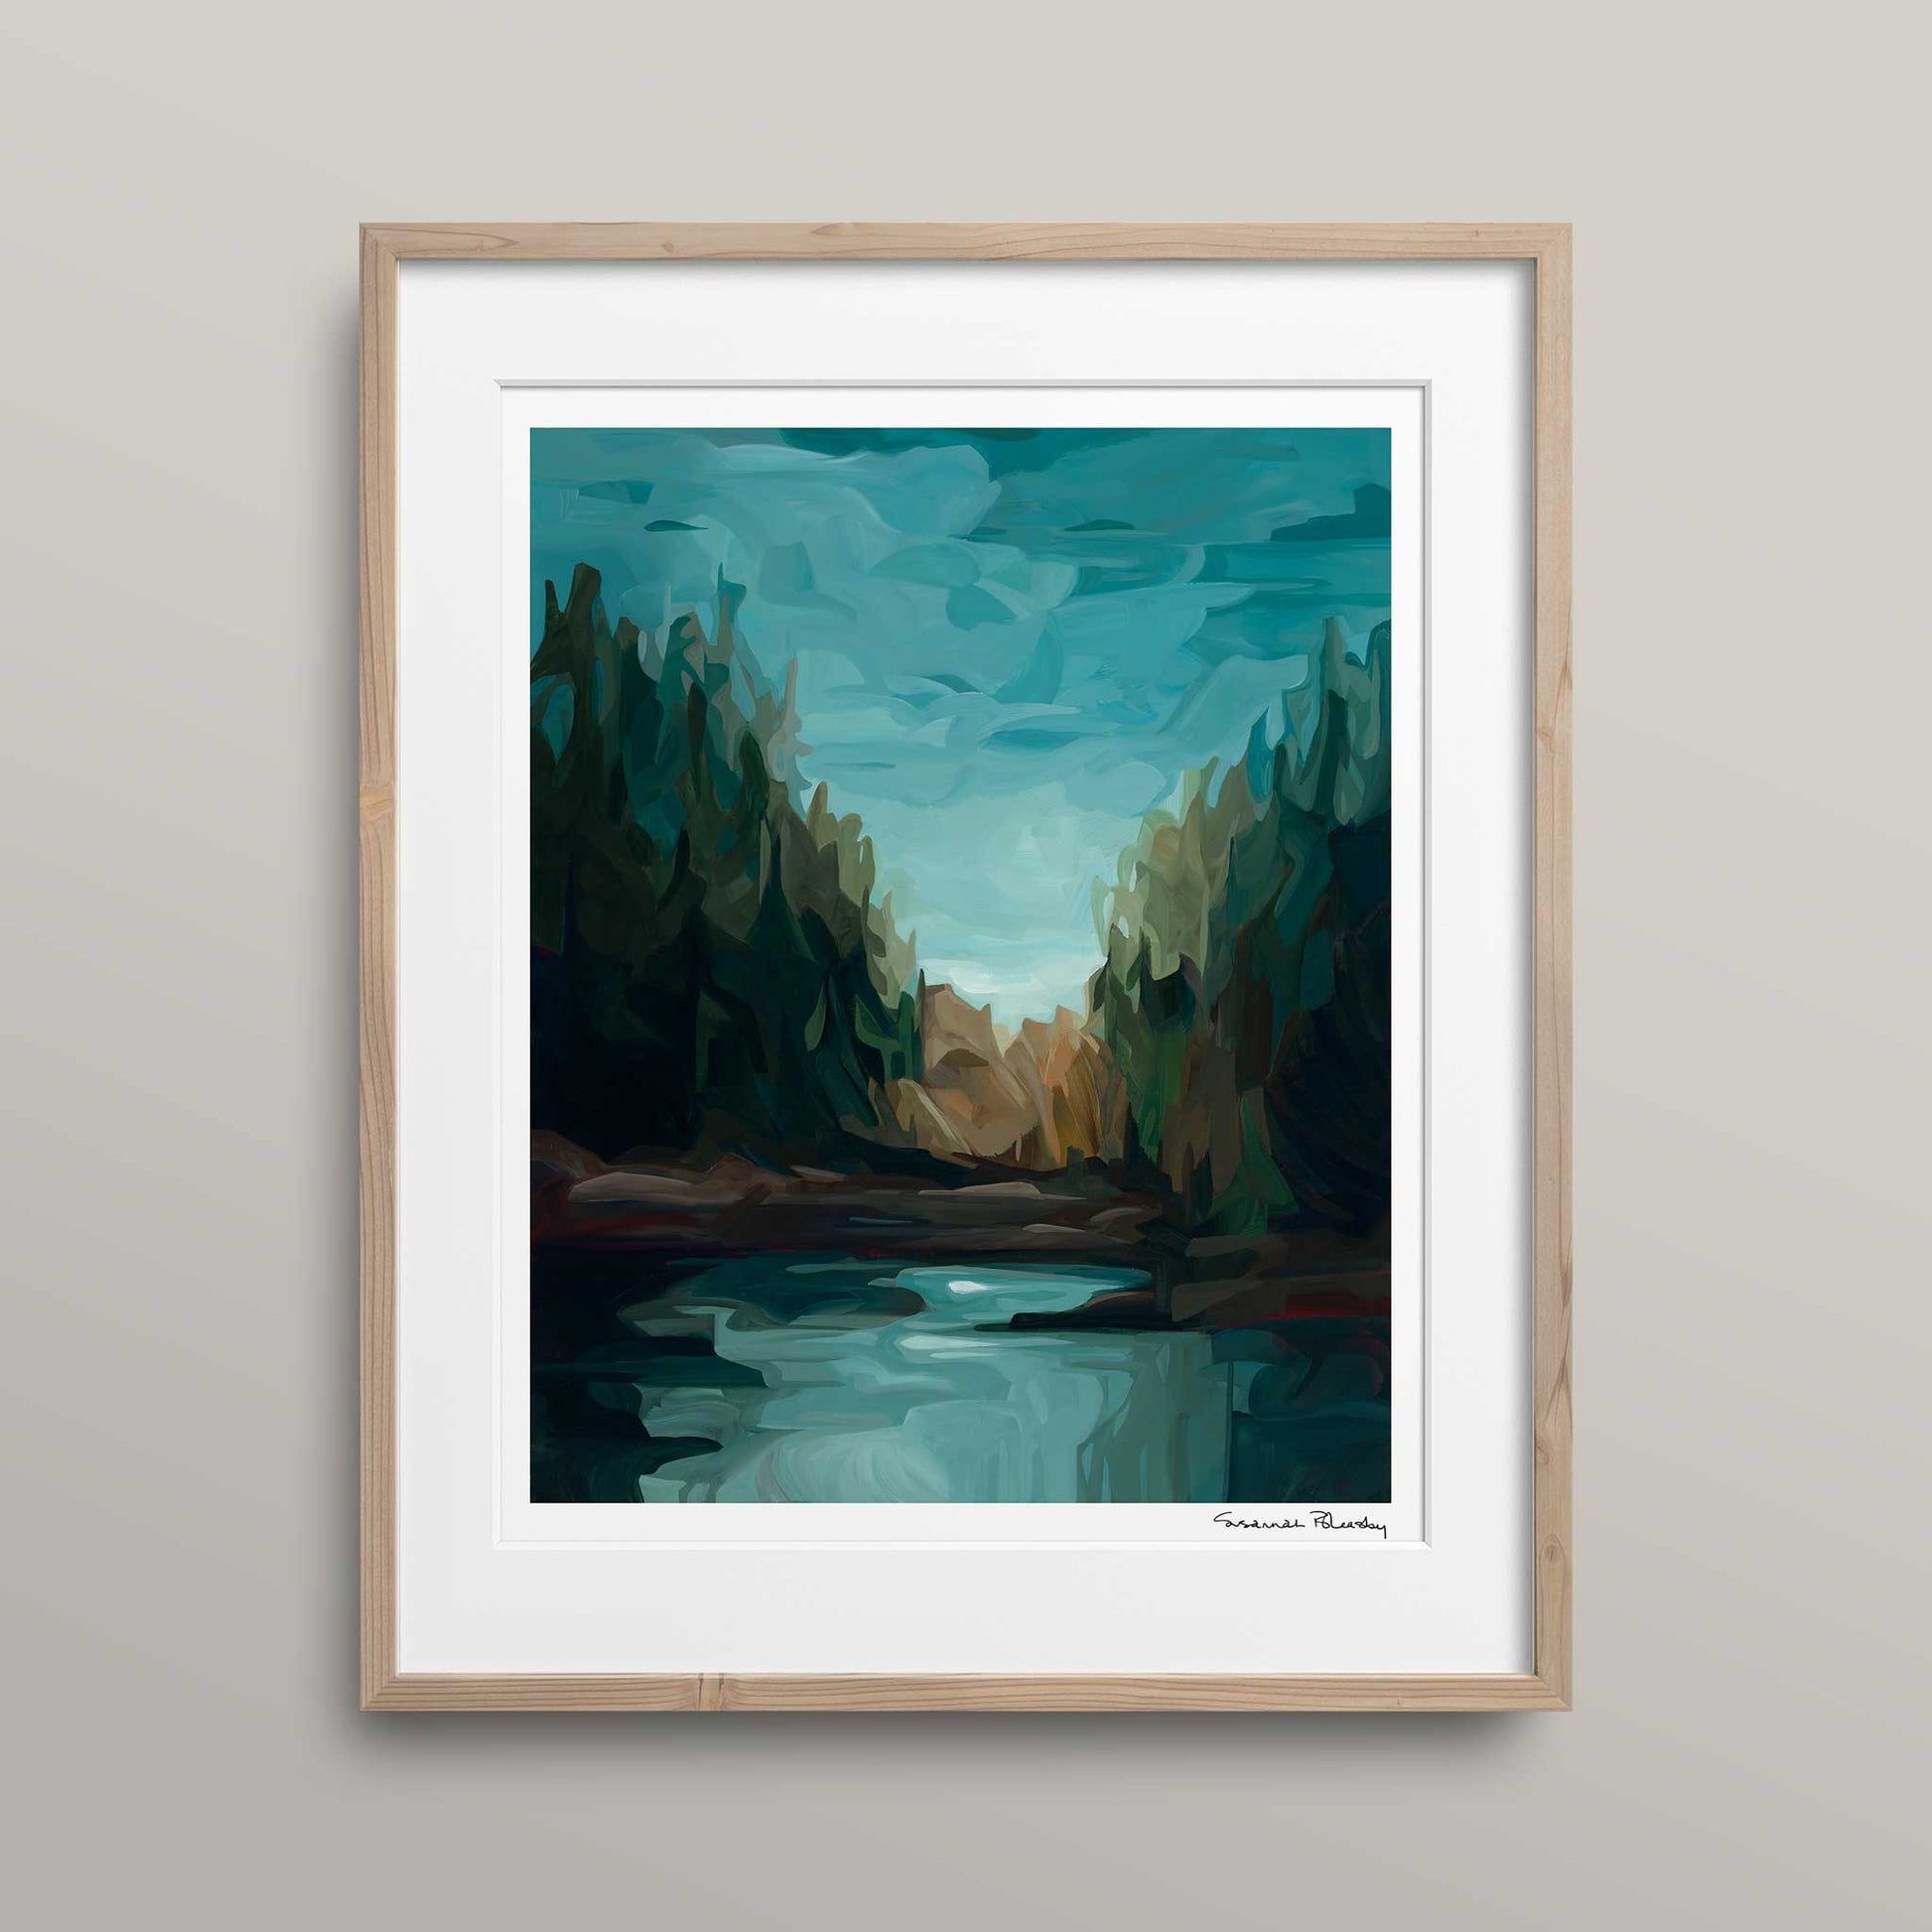 A 16x20 art print created from 'Dewpoint' an abstract forest landscape painting by Canadian artist Susannah Bleasby